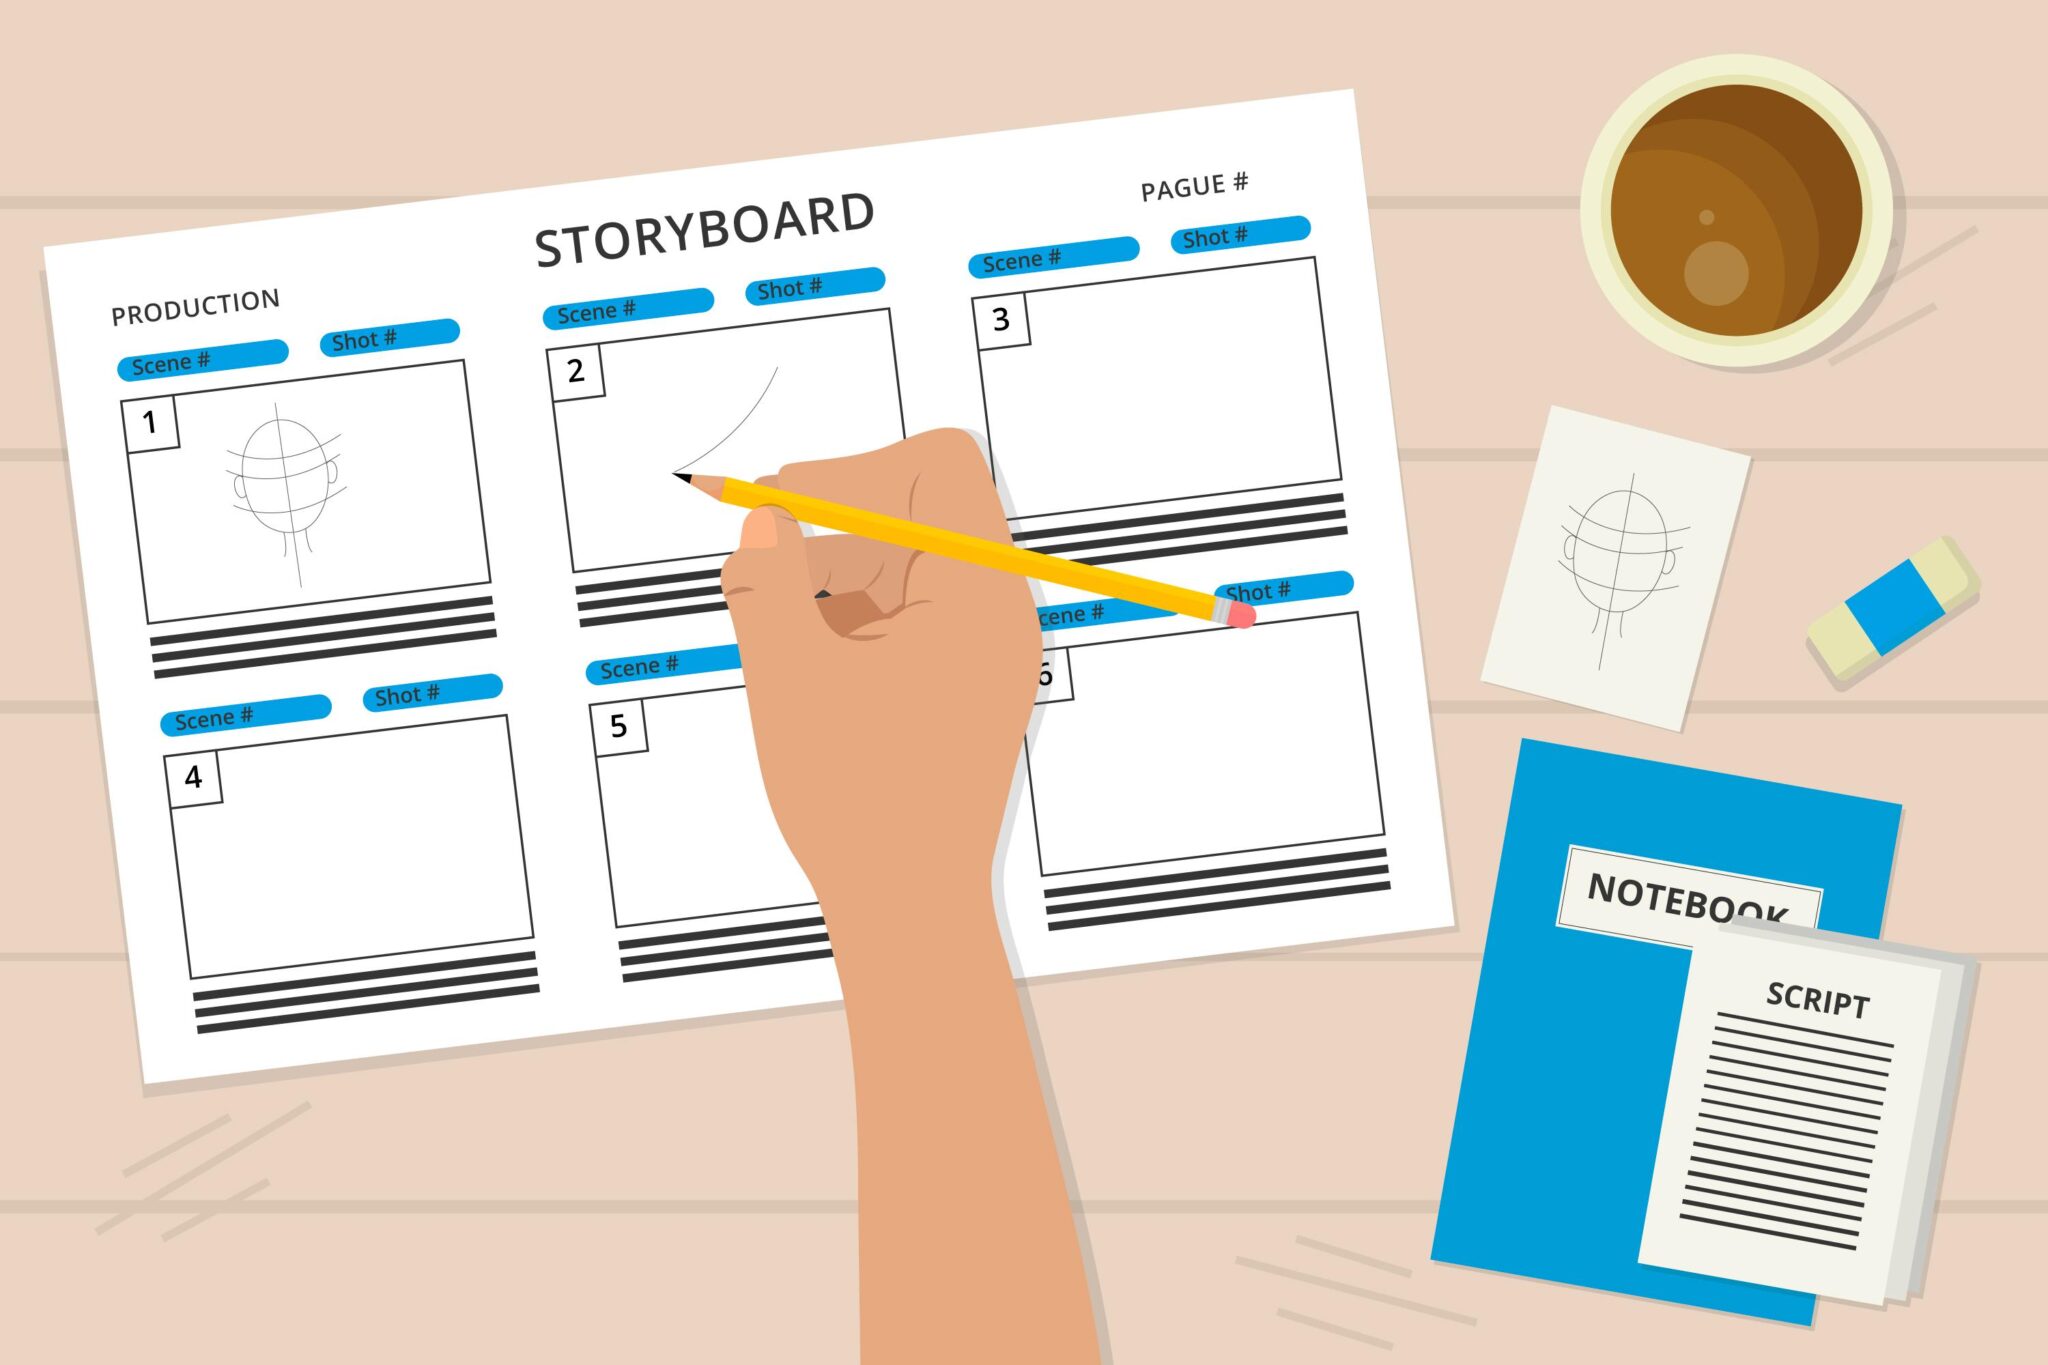 A storyboard with illustrations depicting a visual representation of a story. The storyboard includes several panels, each containing a different illustration representing a scene or concept related to the eLearning content being presented